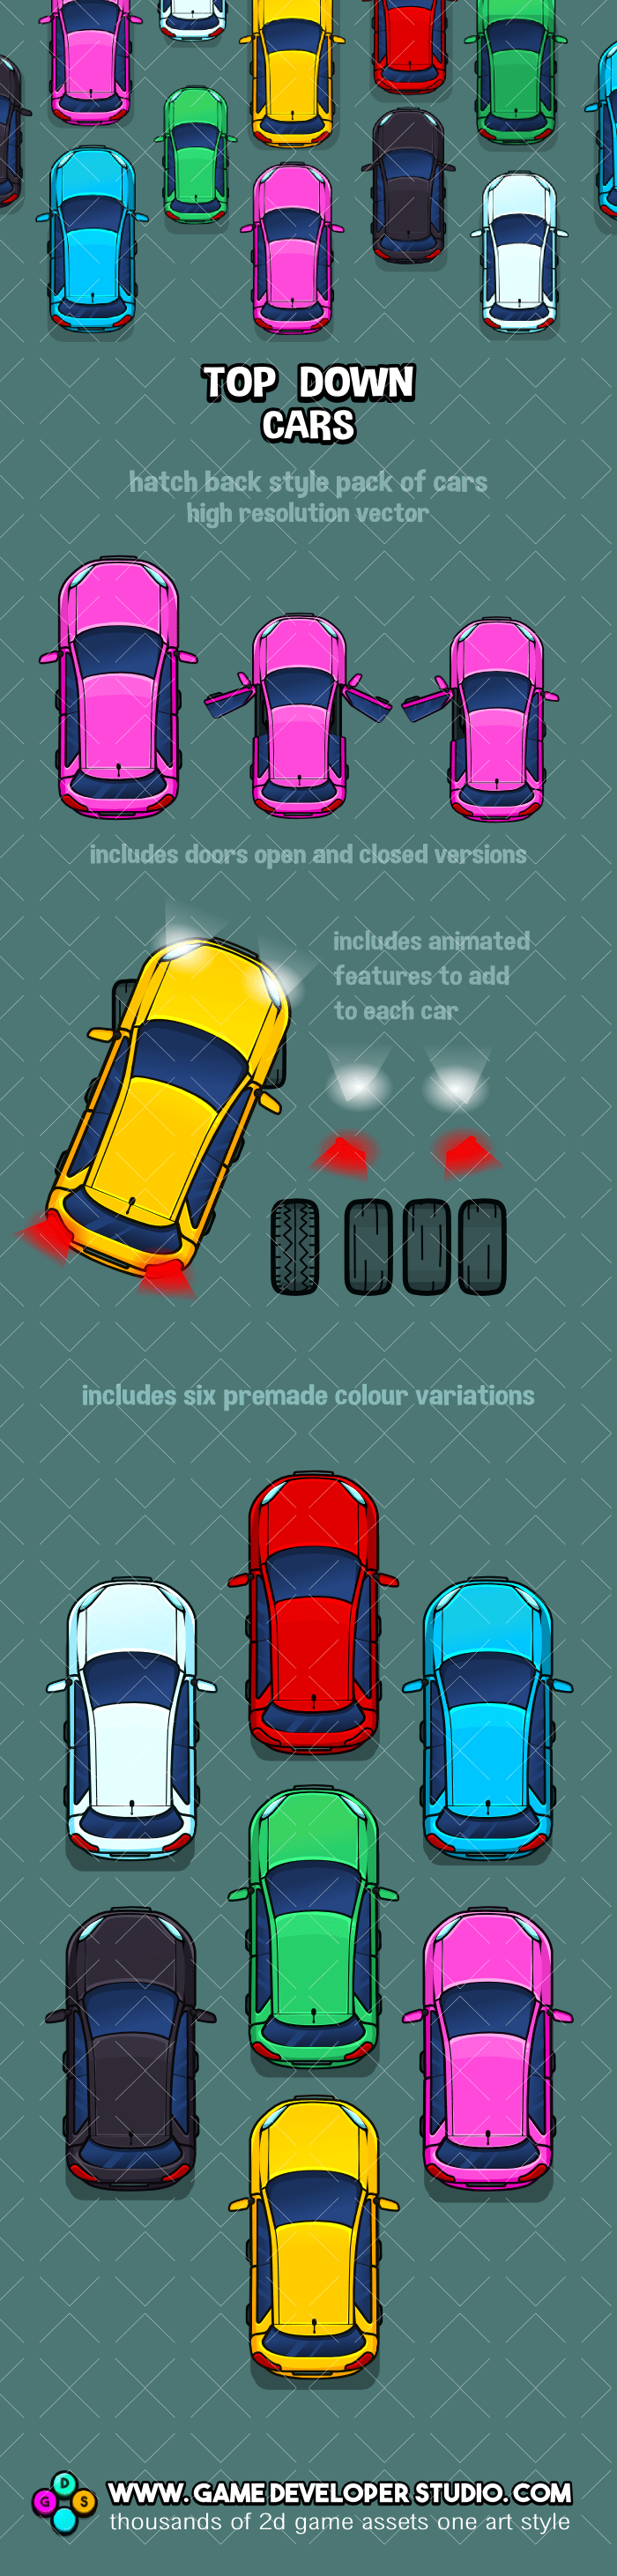 Top down cars game asset pack